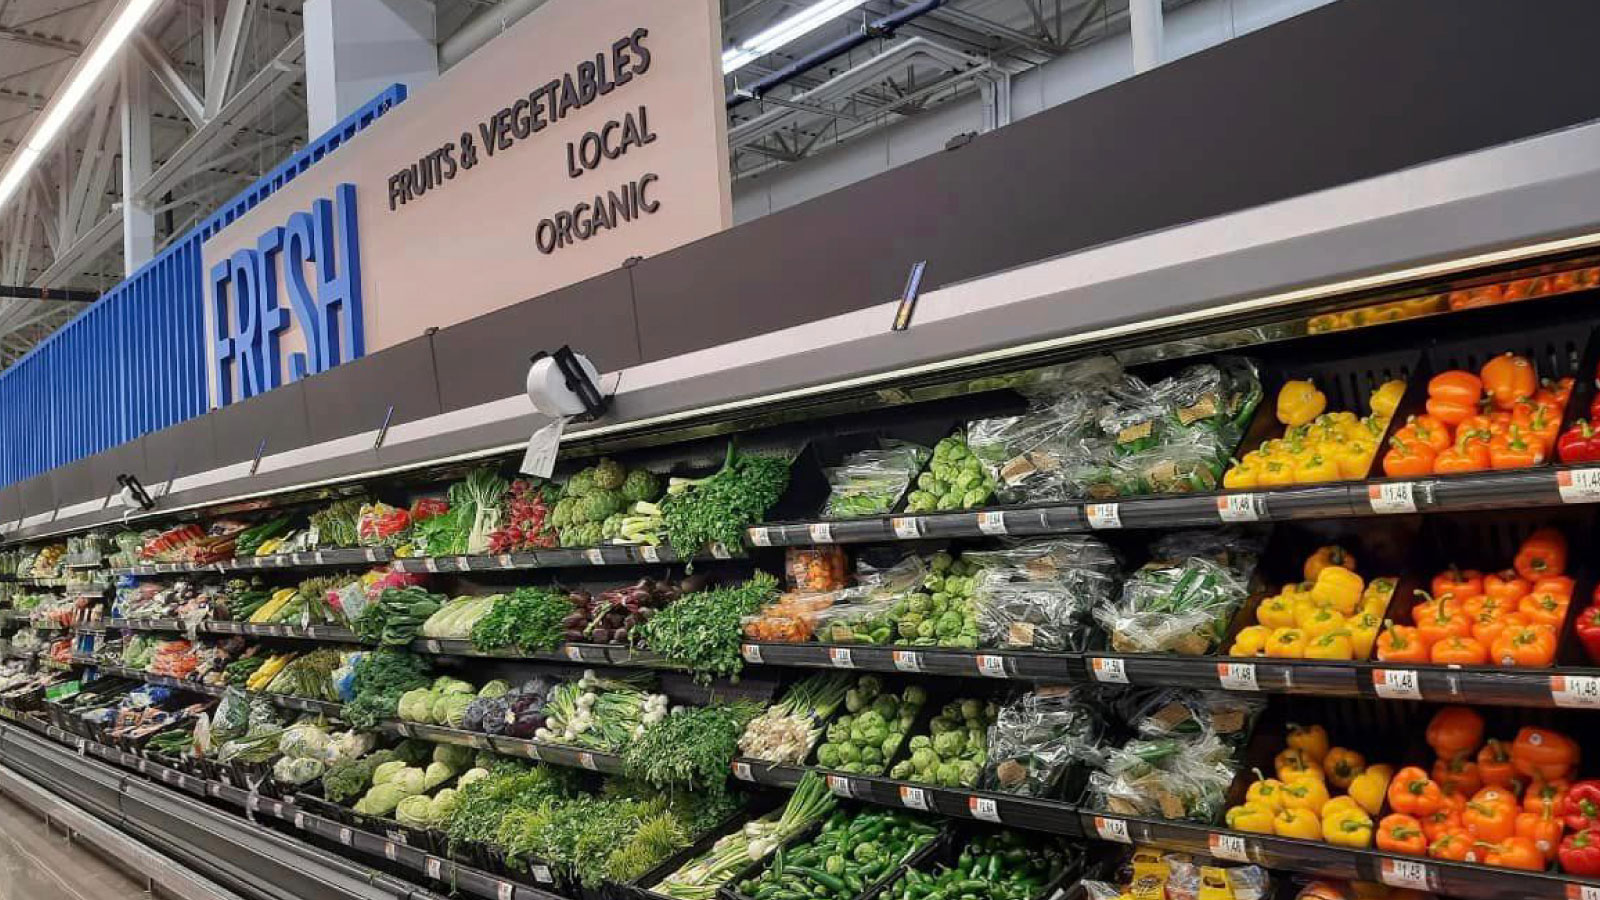 Produce department showing fresh vegetables. Sign above grocery case reads fresh, fruits and vegetables, local, organic.